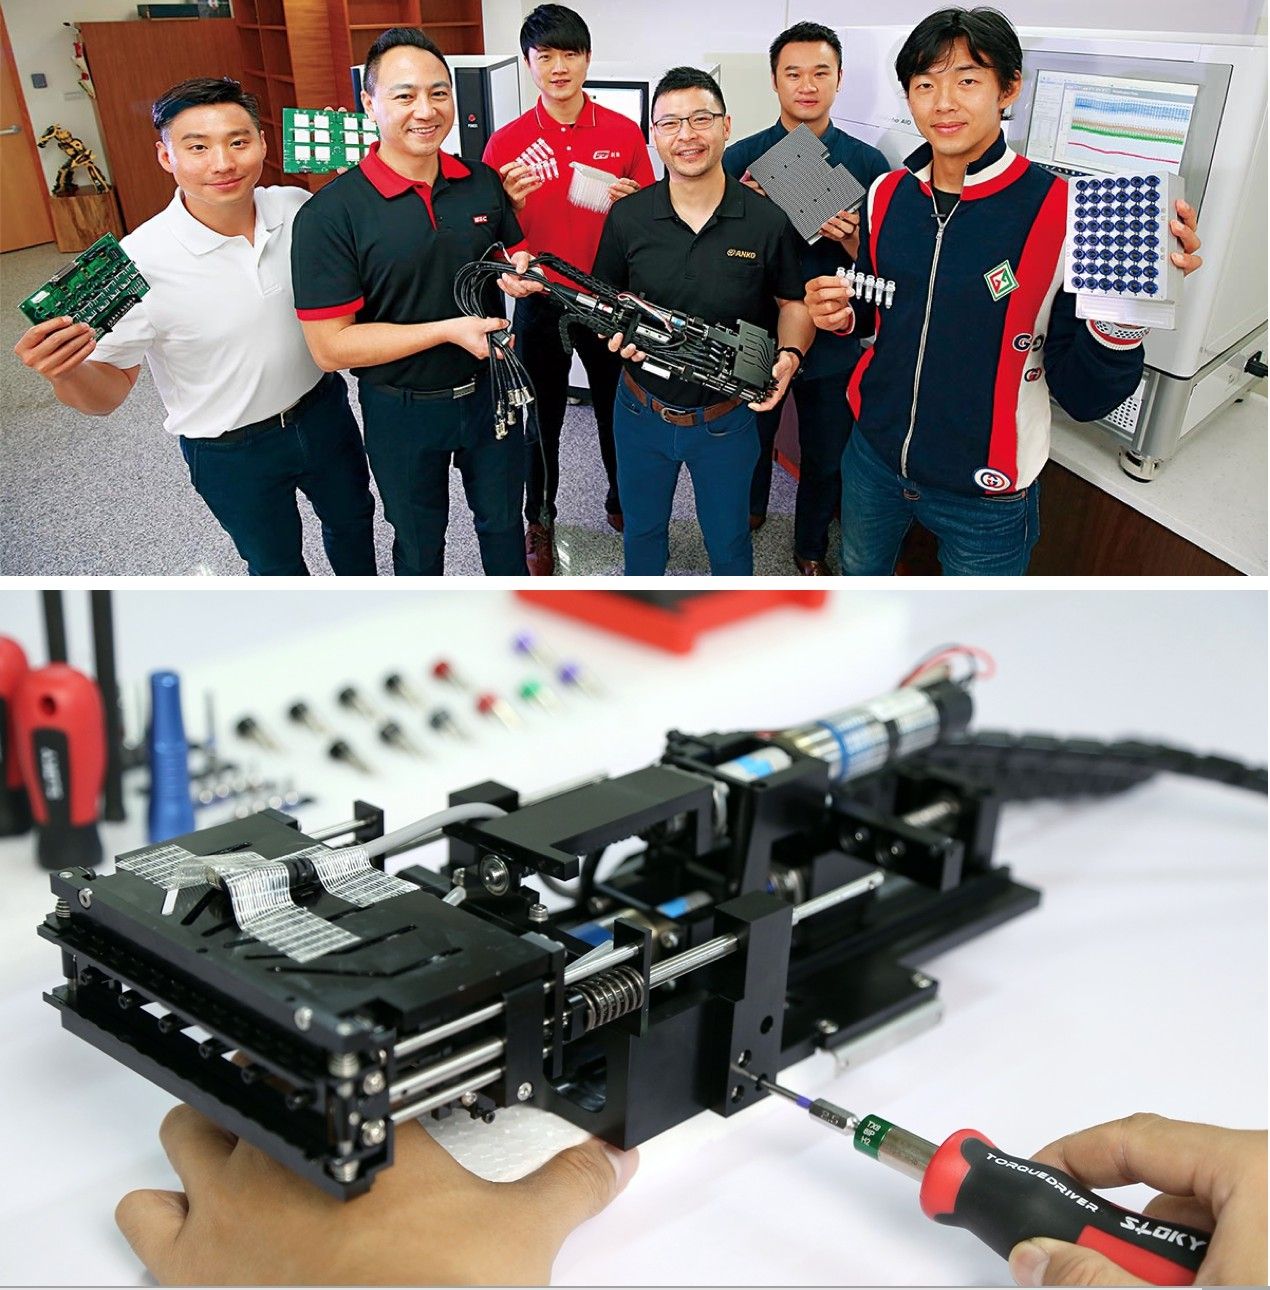 Sloky and Chienfu are very proud to be a part of Team Taiwan of second generation and able to contribute our expertise of torque control.